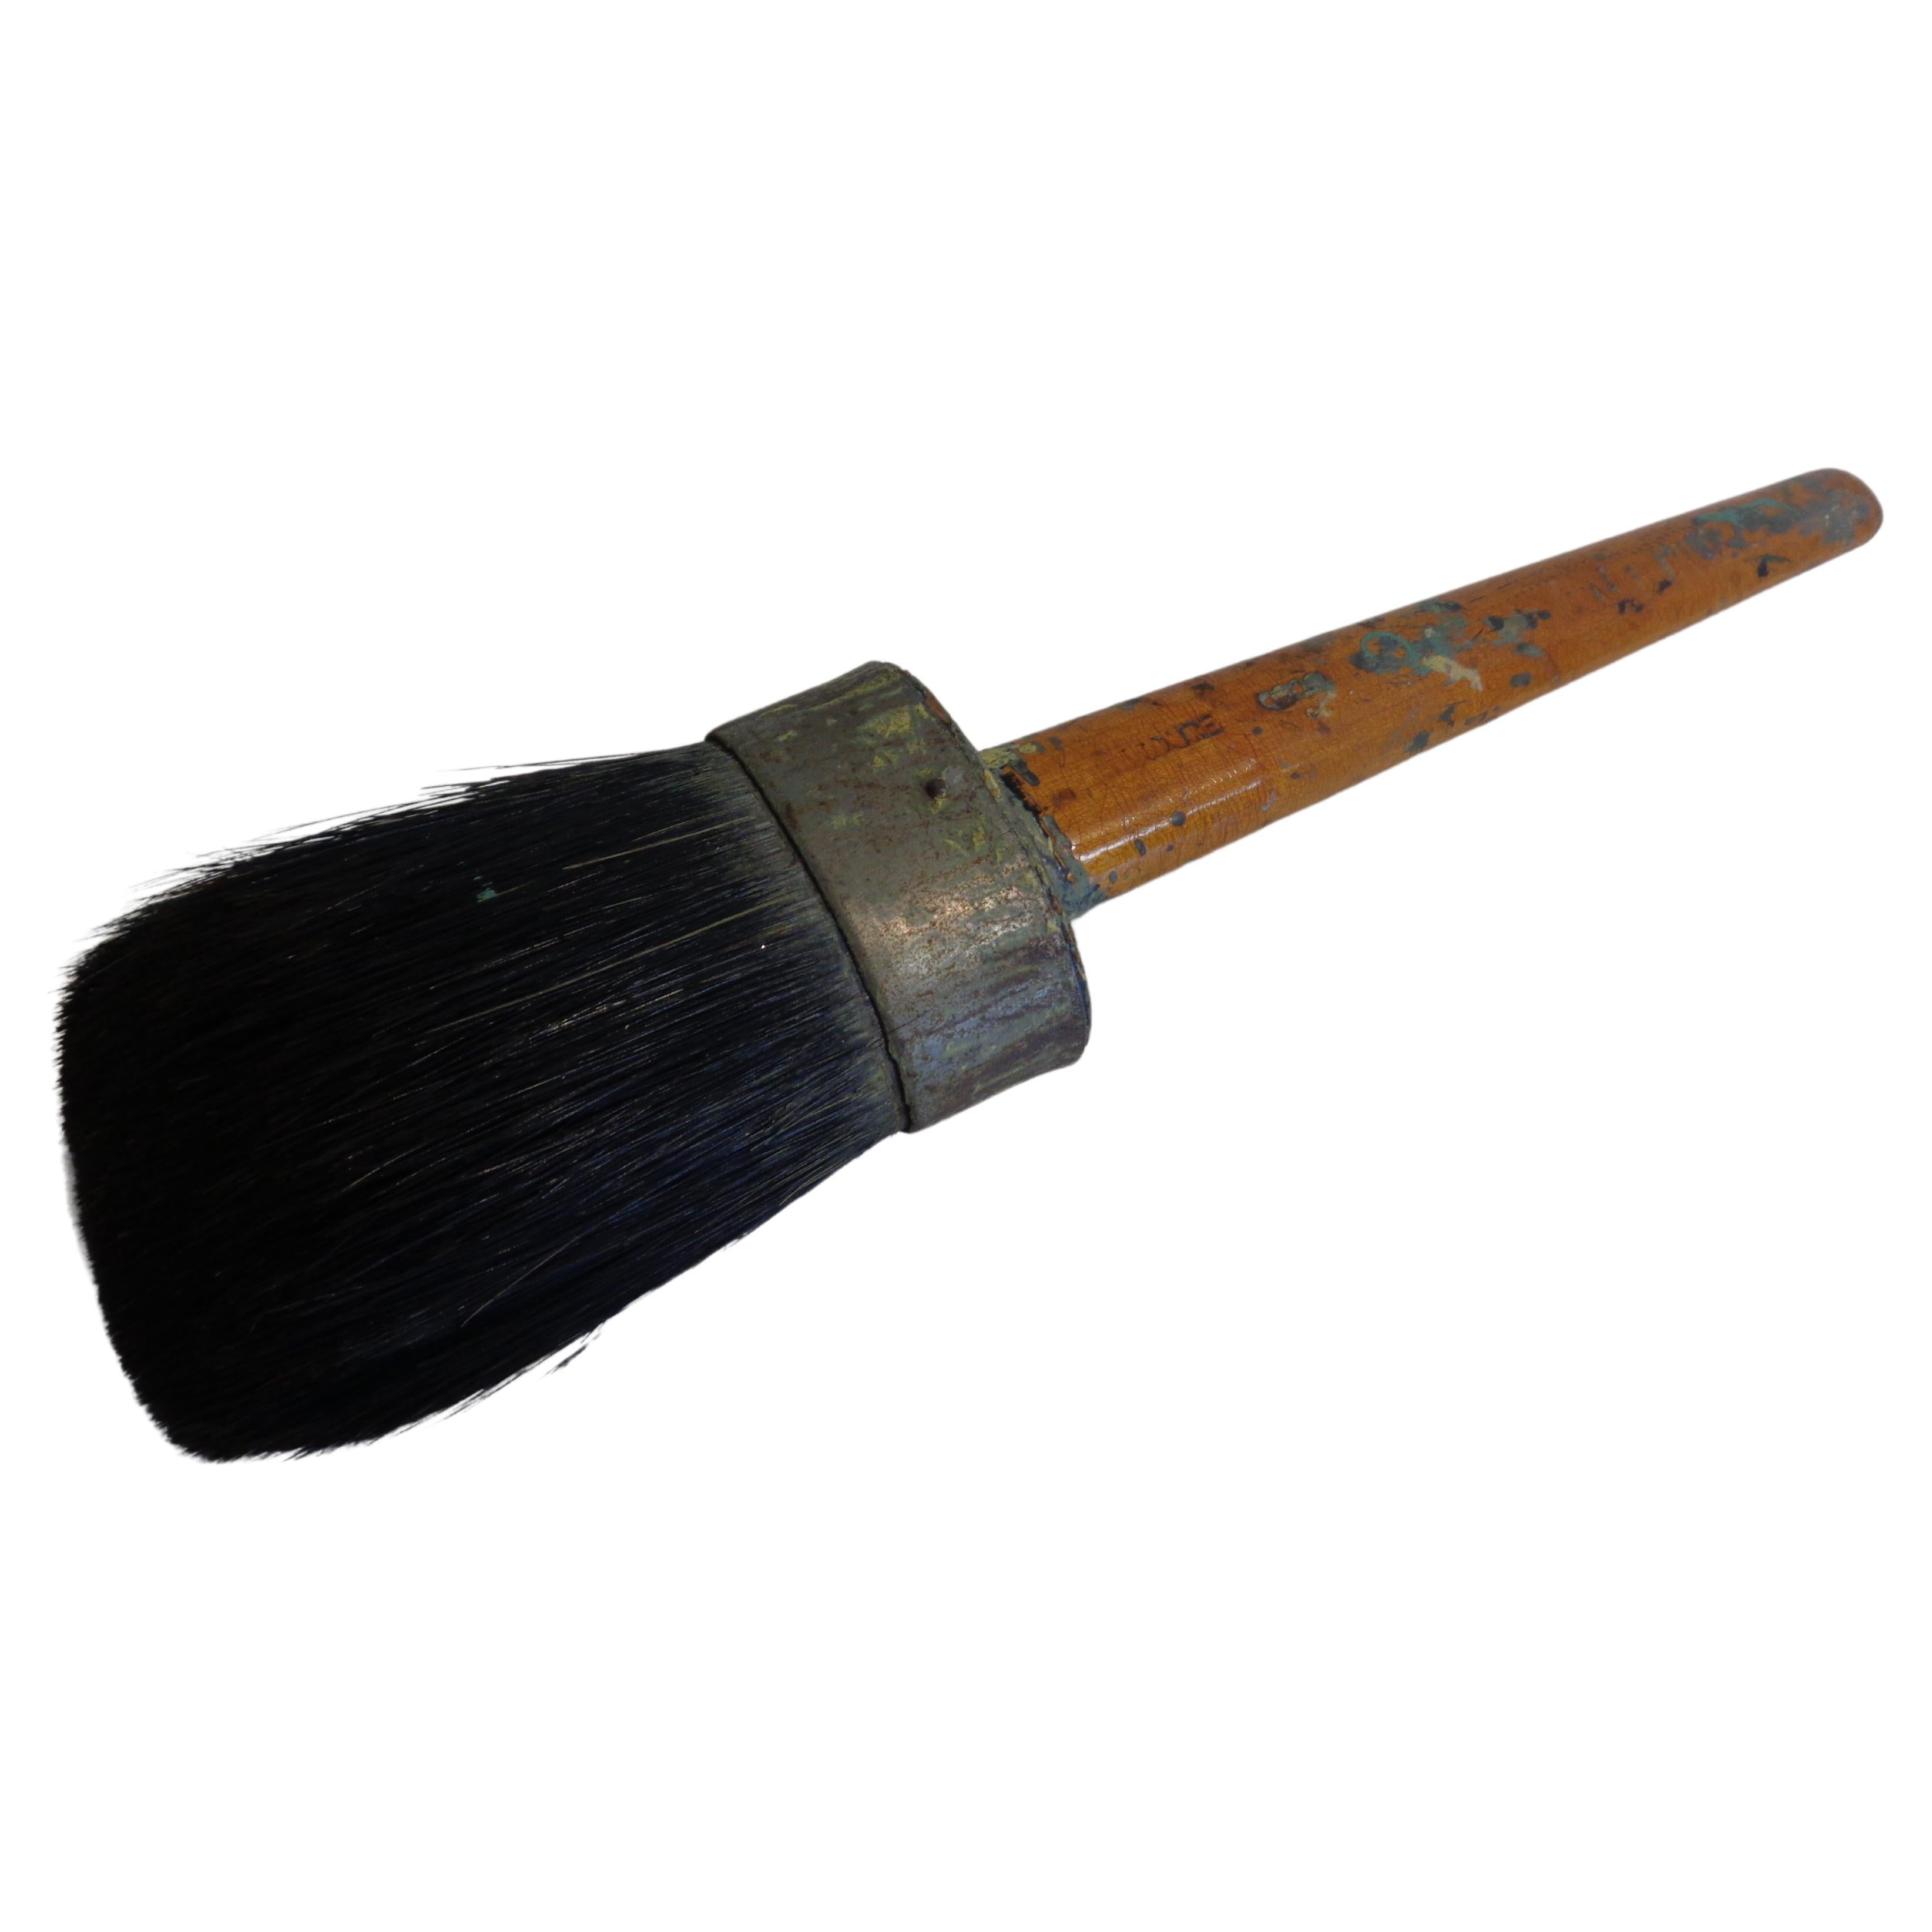  Antique Signed Large Horse Hair Paint Brush For Sale